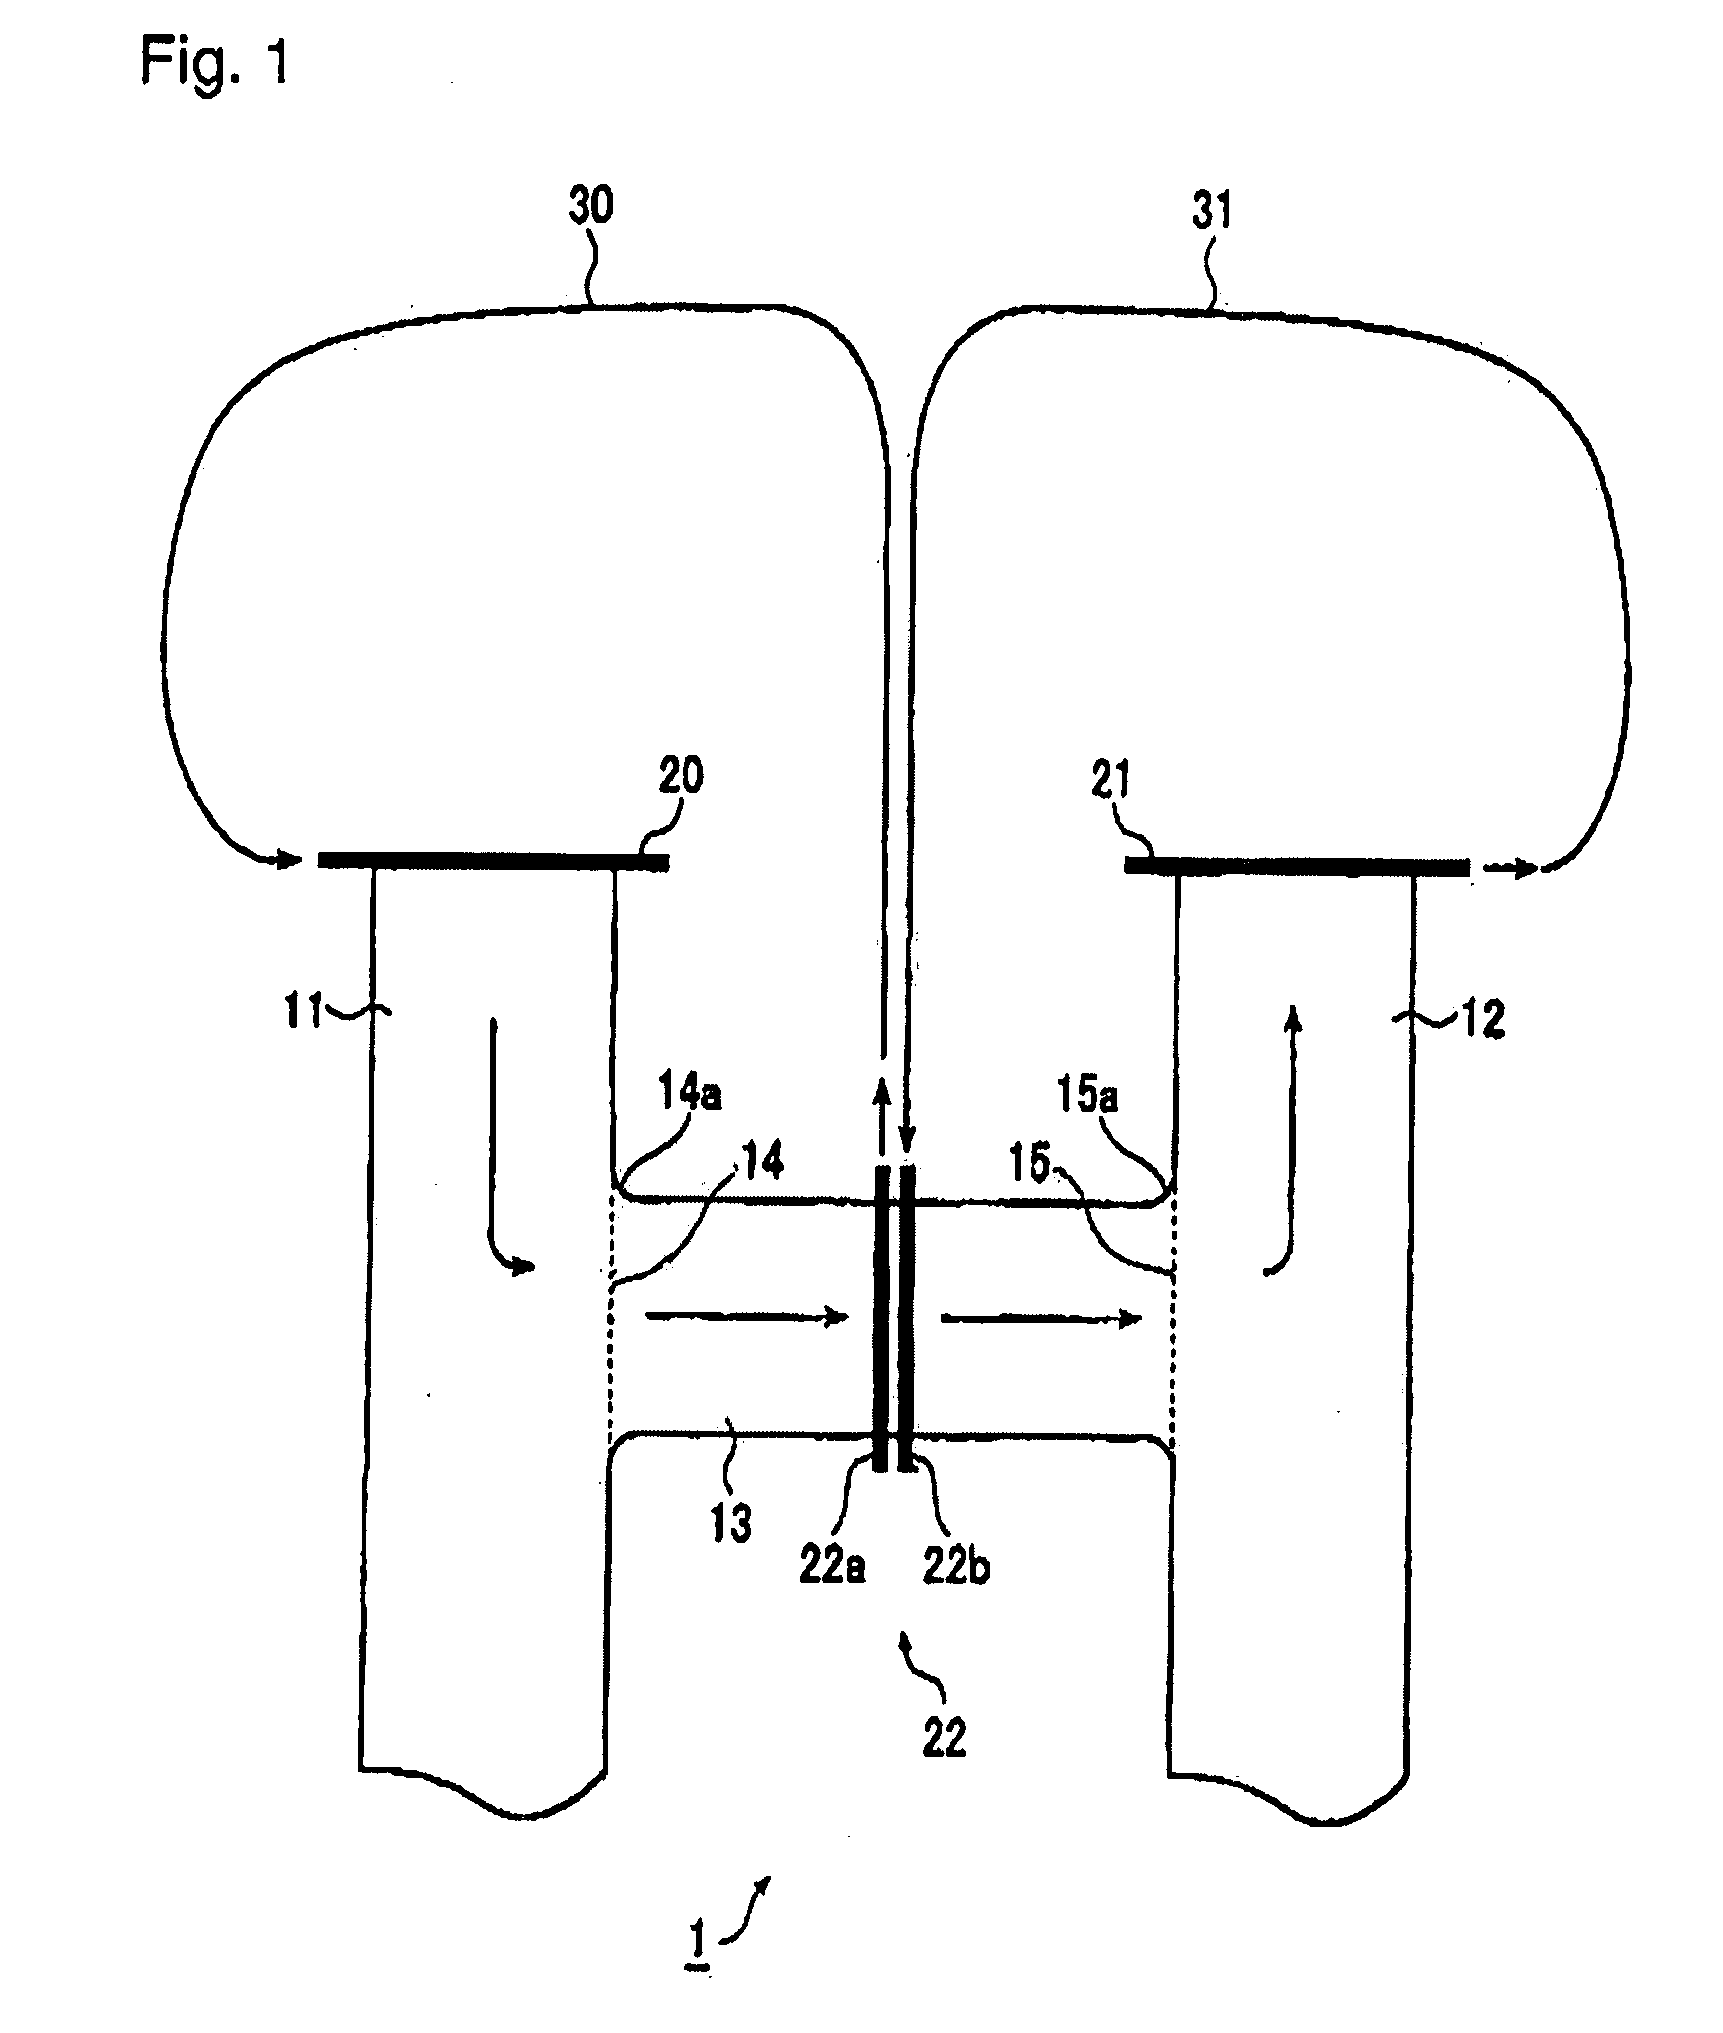 Method for electrically energizing and heating platinum composite tube structure